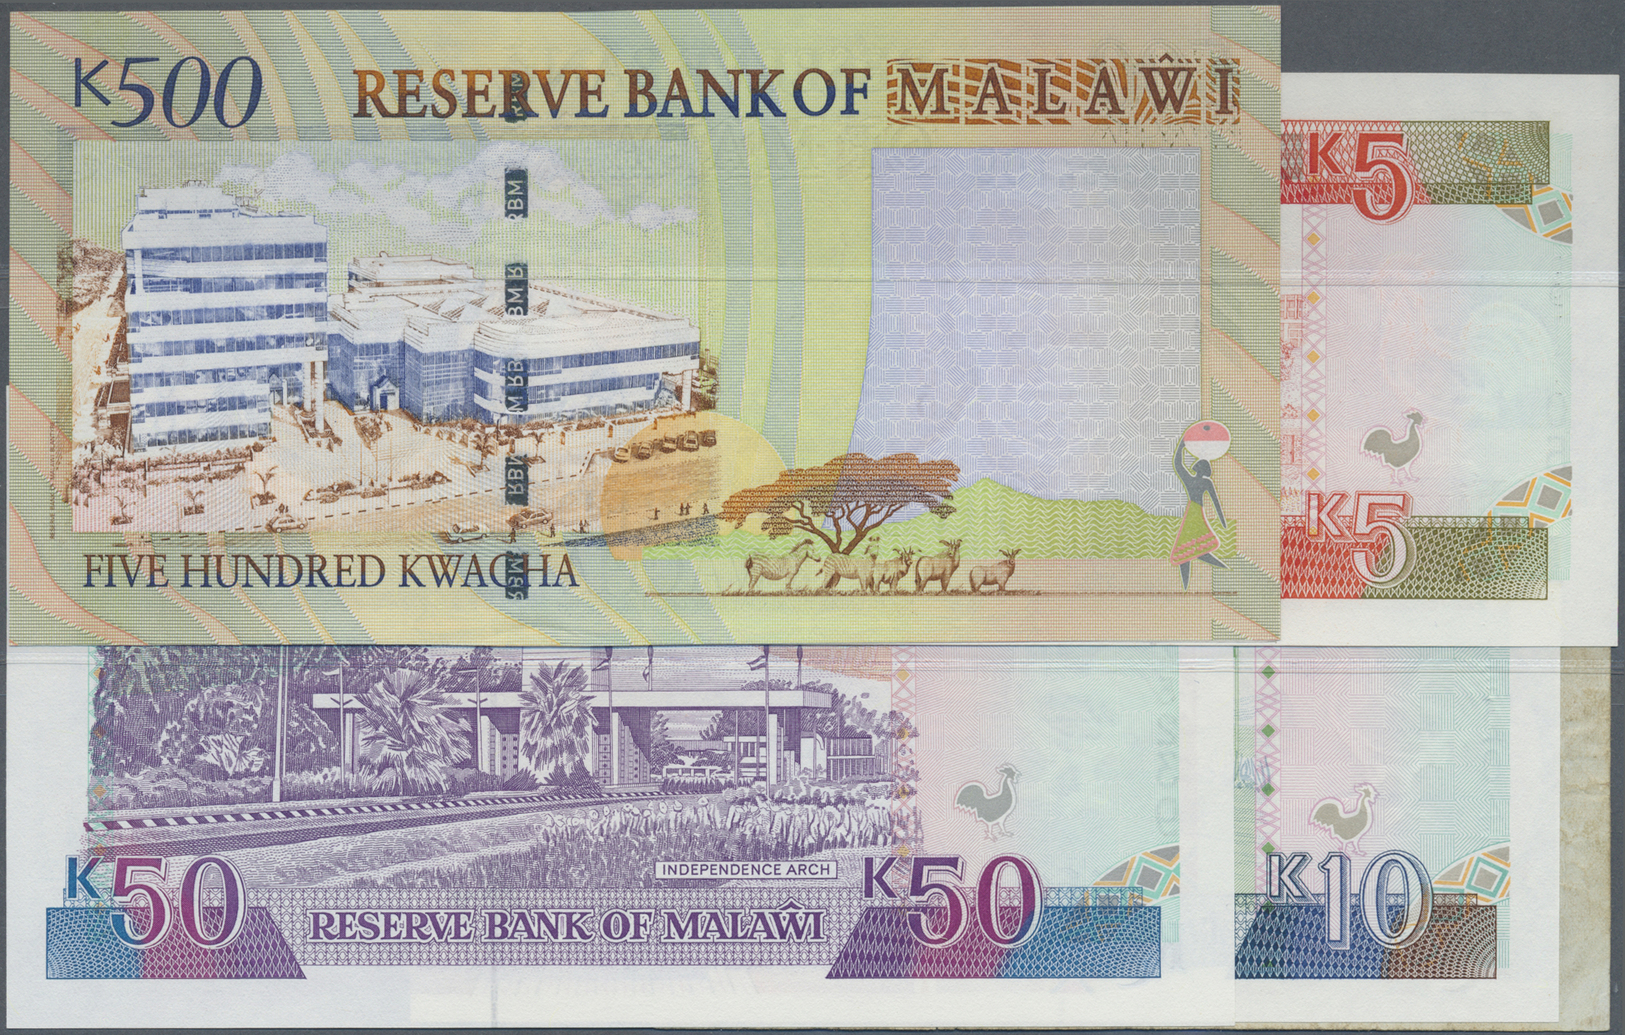 01631 Malawi: Set Of 16 Notes Of Different Series Containing 1000 Kwacha 2012, 10 Kwacha 1992, 100 Kwacha 2012, 500 Kwac - Malawi